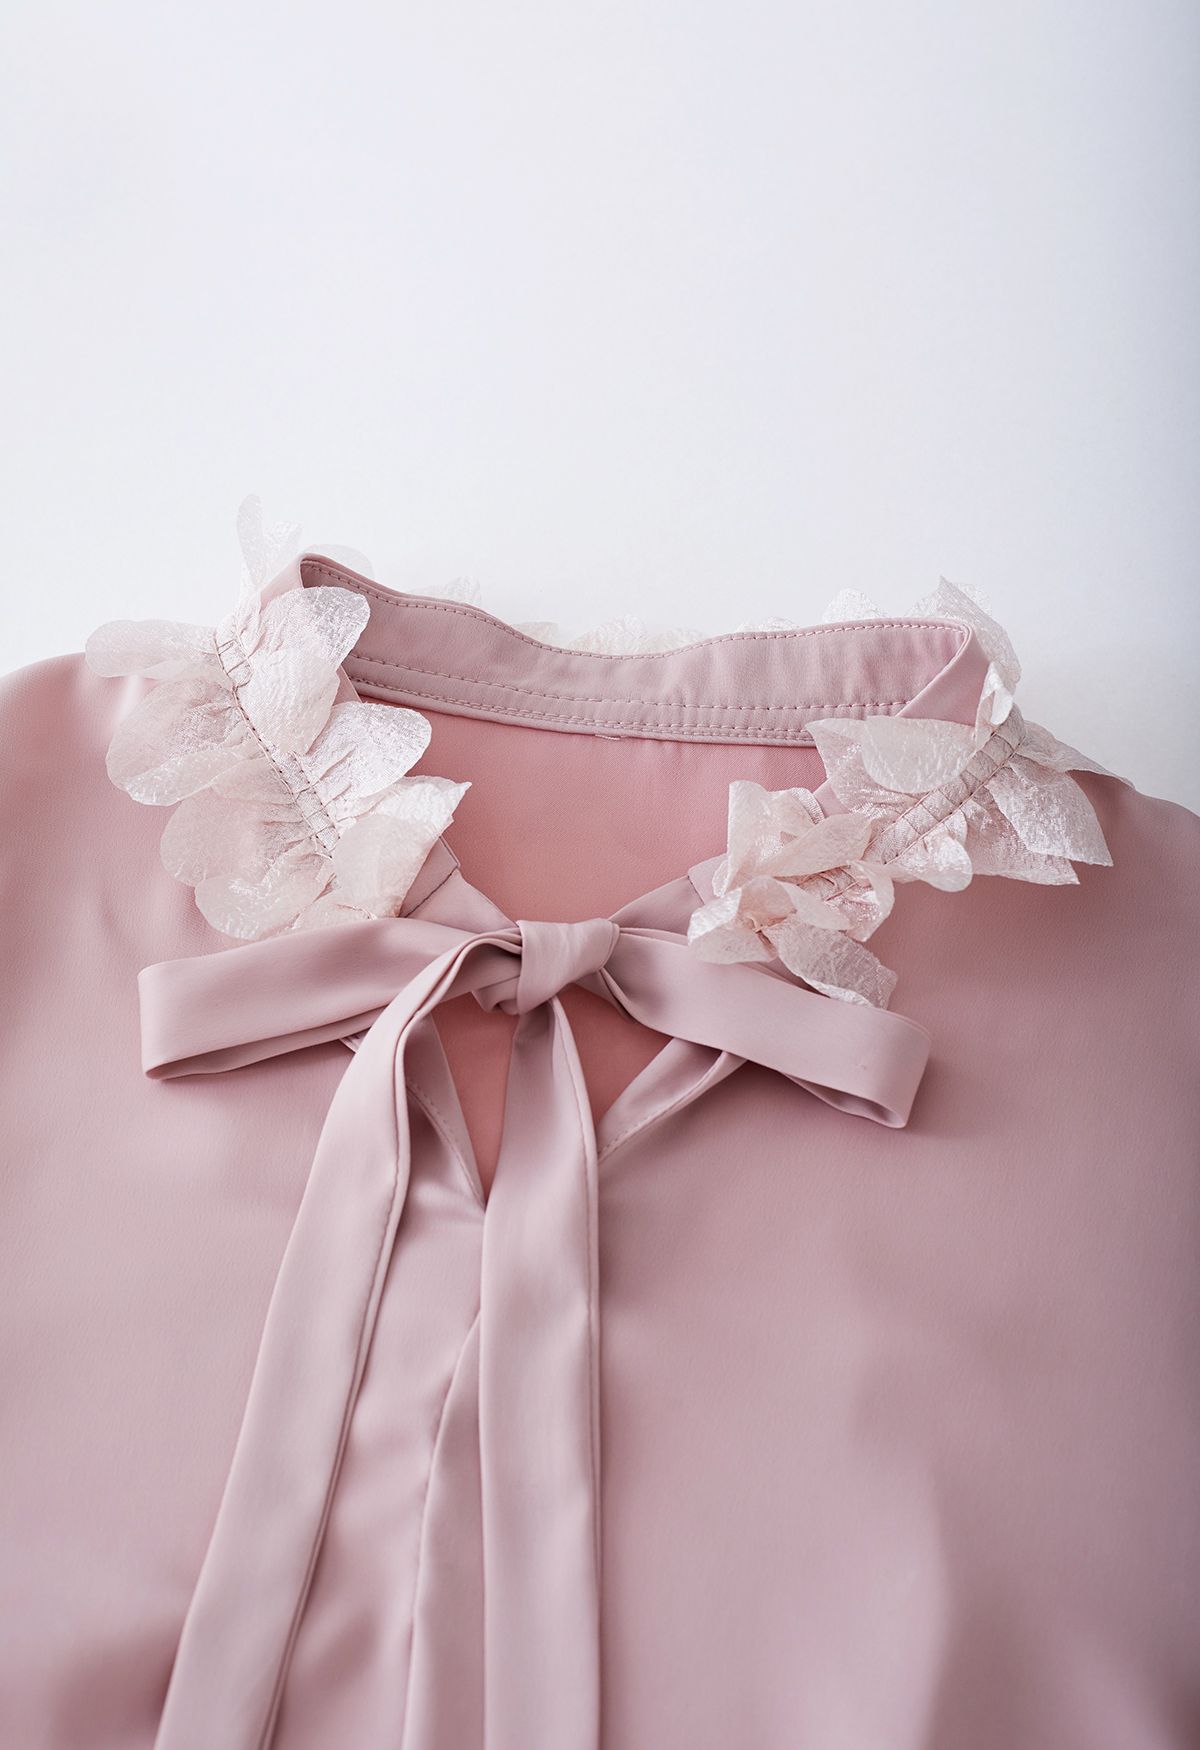 Petal Trim Bowknot Satin Shirt in Pink - Retro, Indie and Unique Fashion